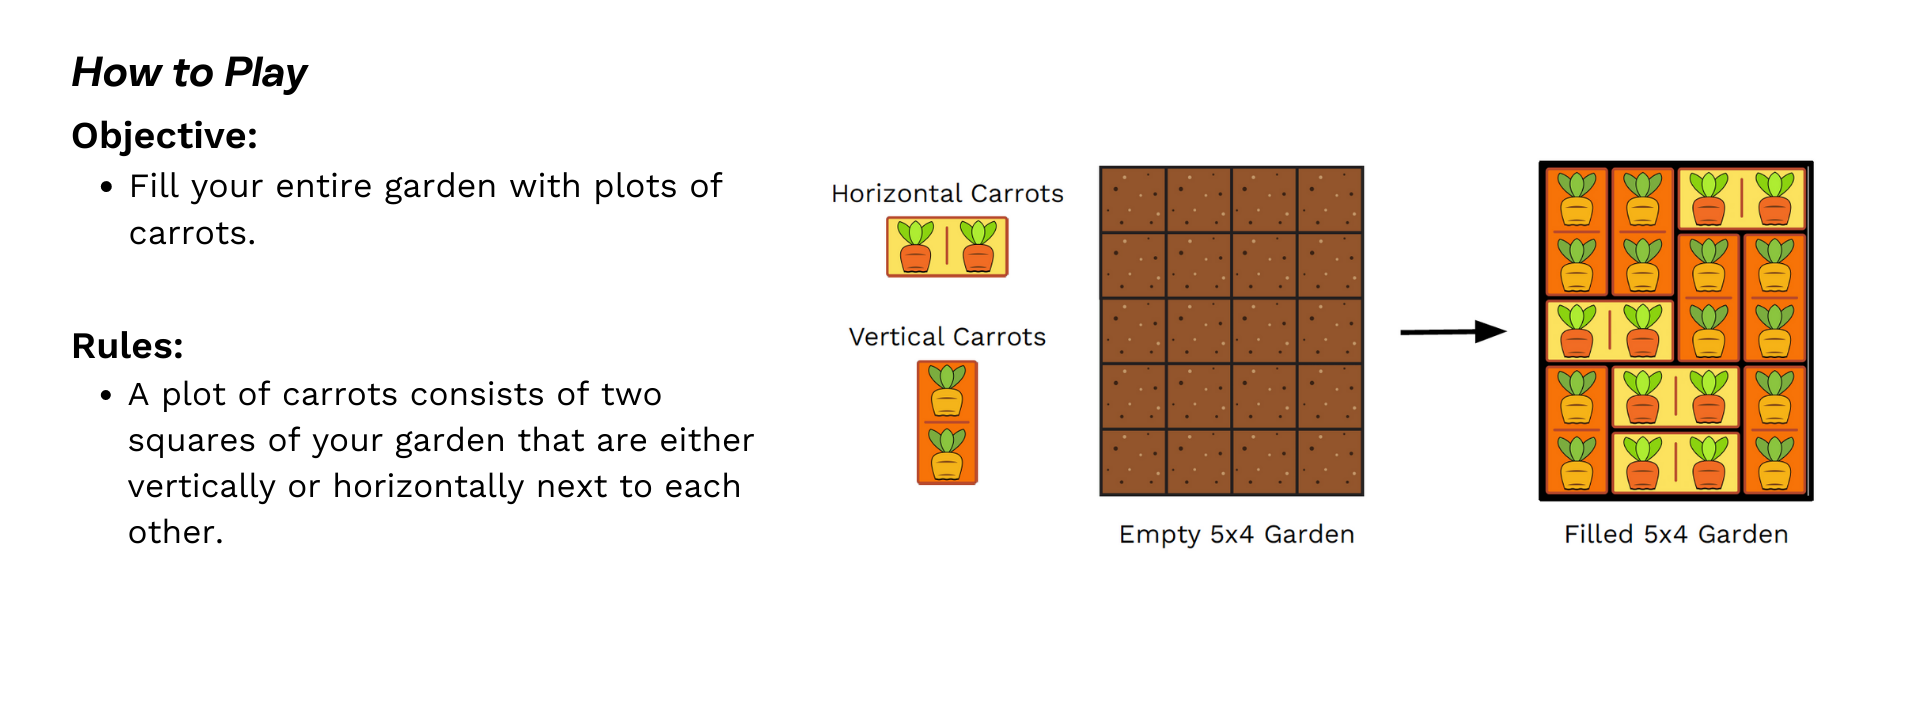 Objective: Fill your entire garden with plots of carrots.